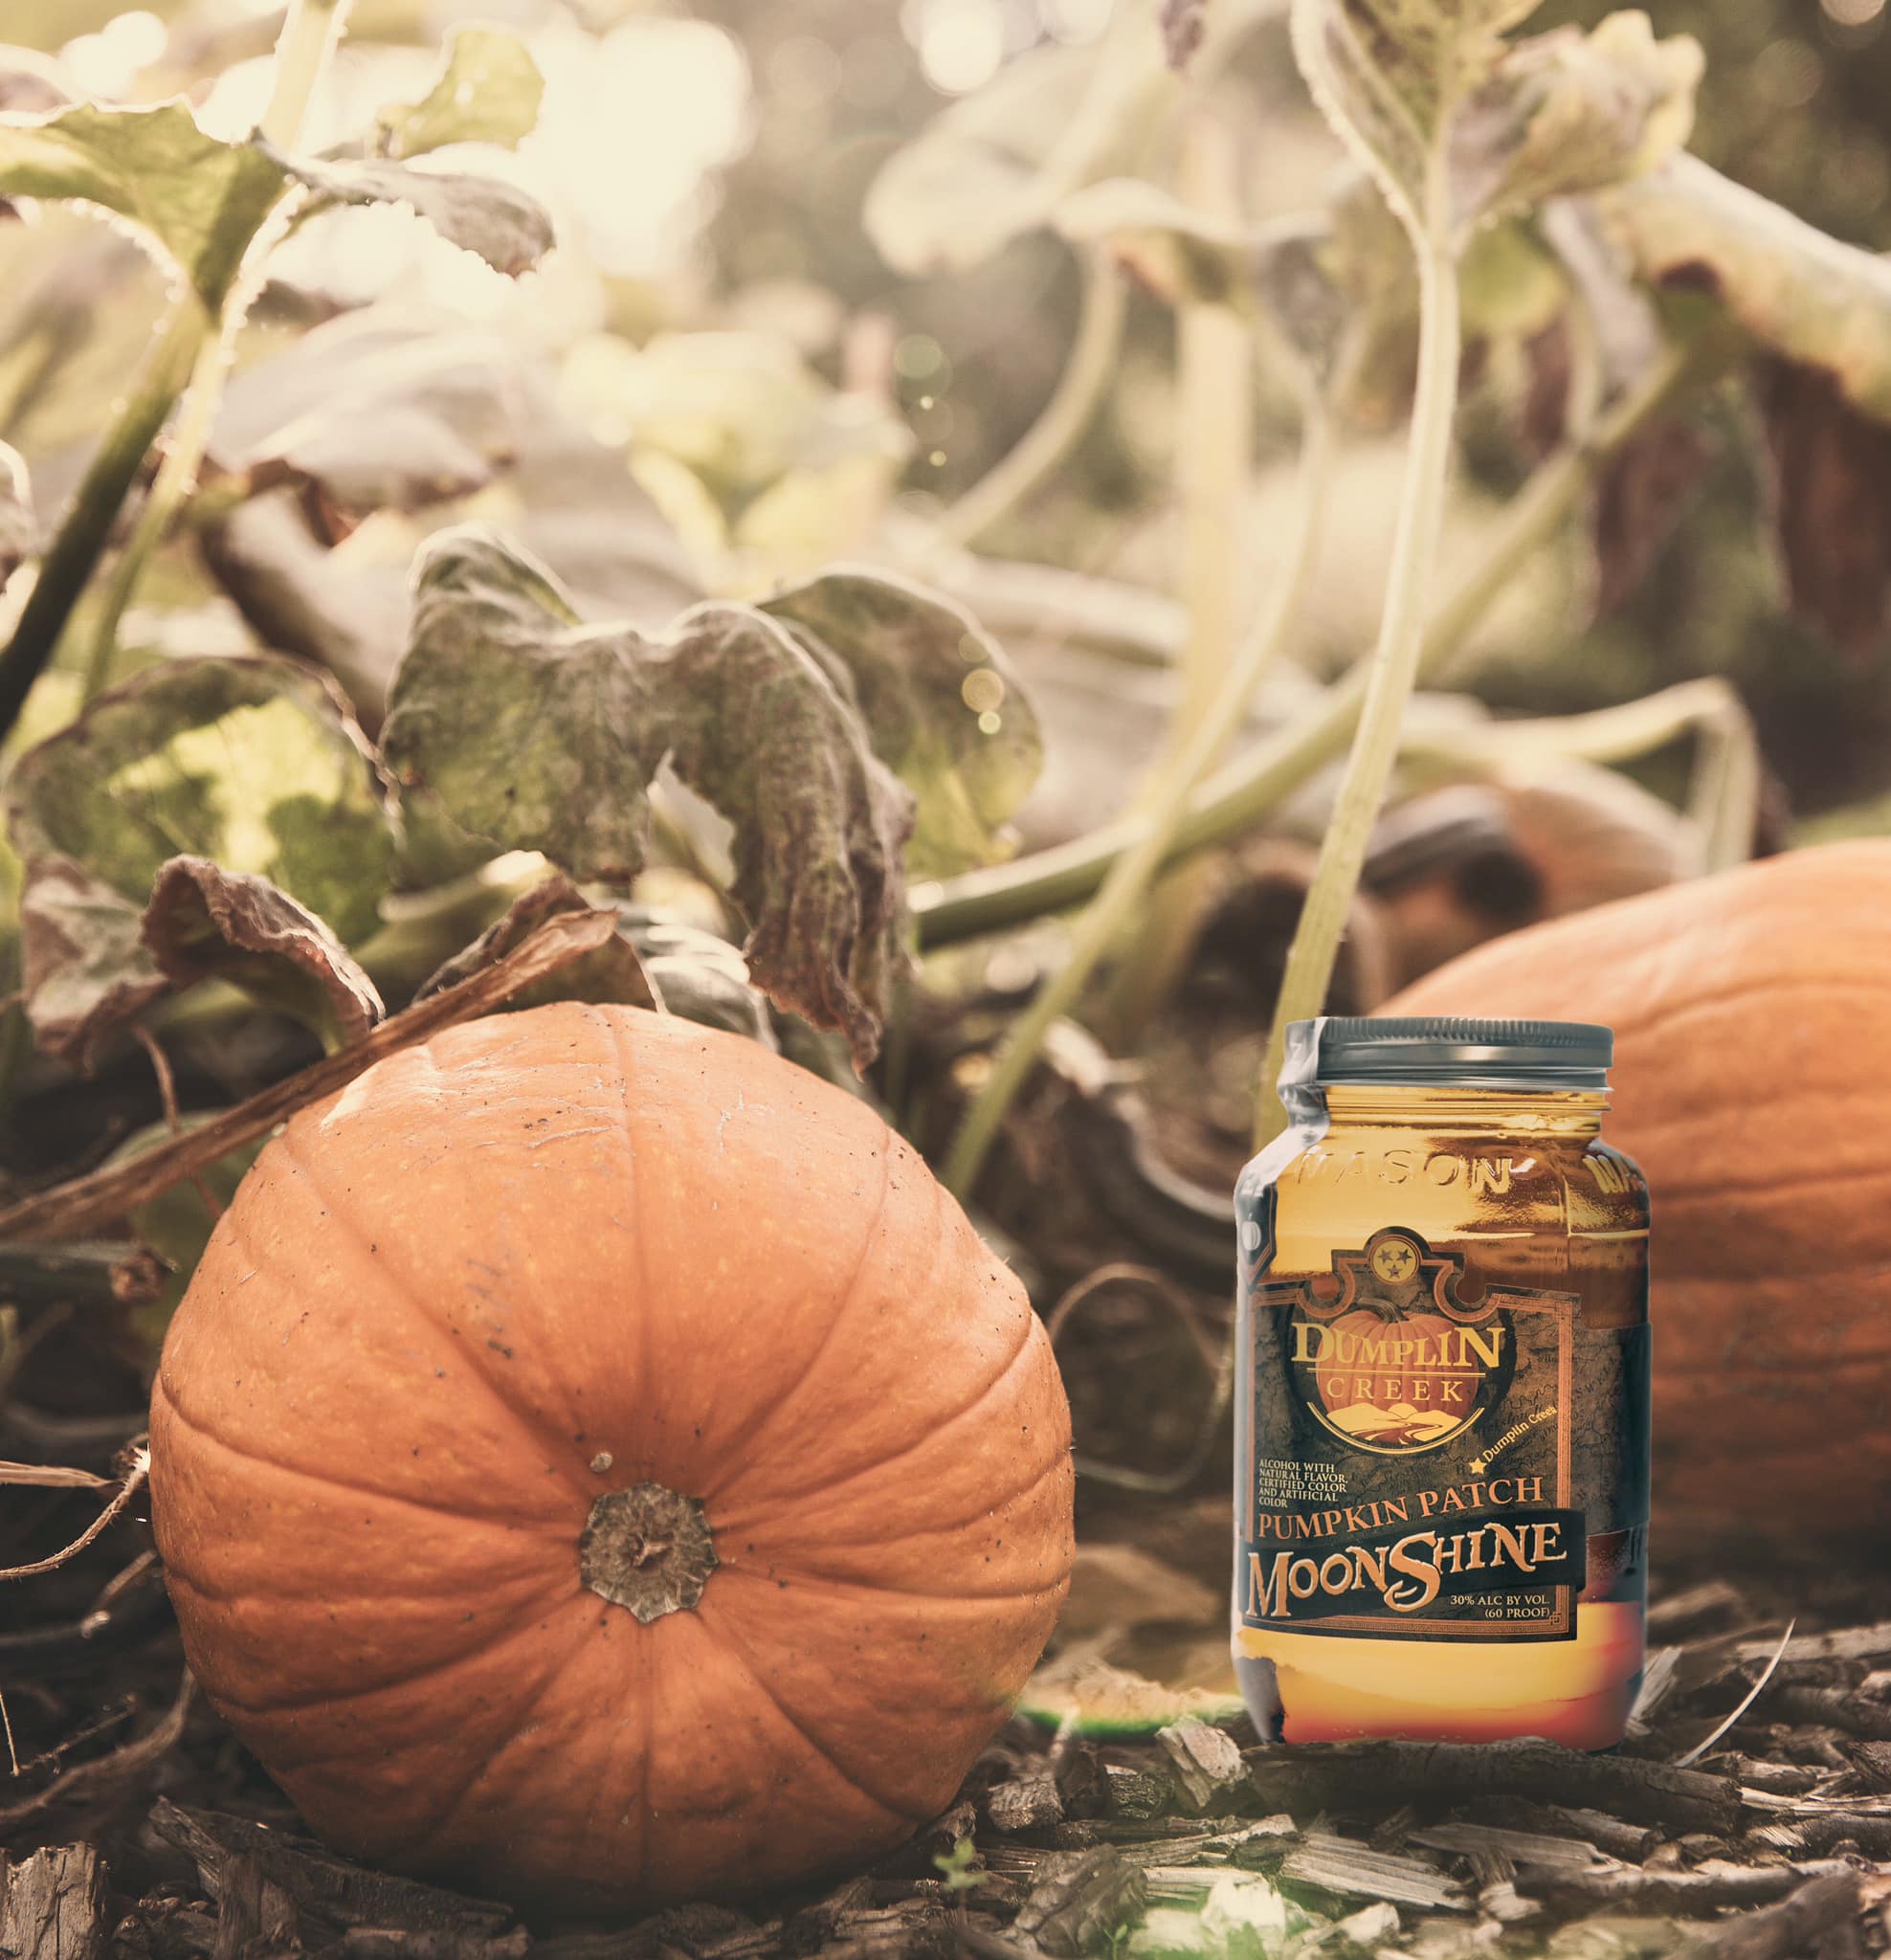 The best part about thanksgiving is pumpkin moonshine.